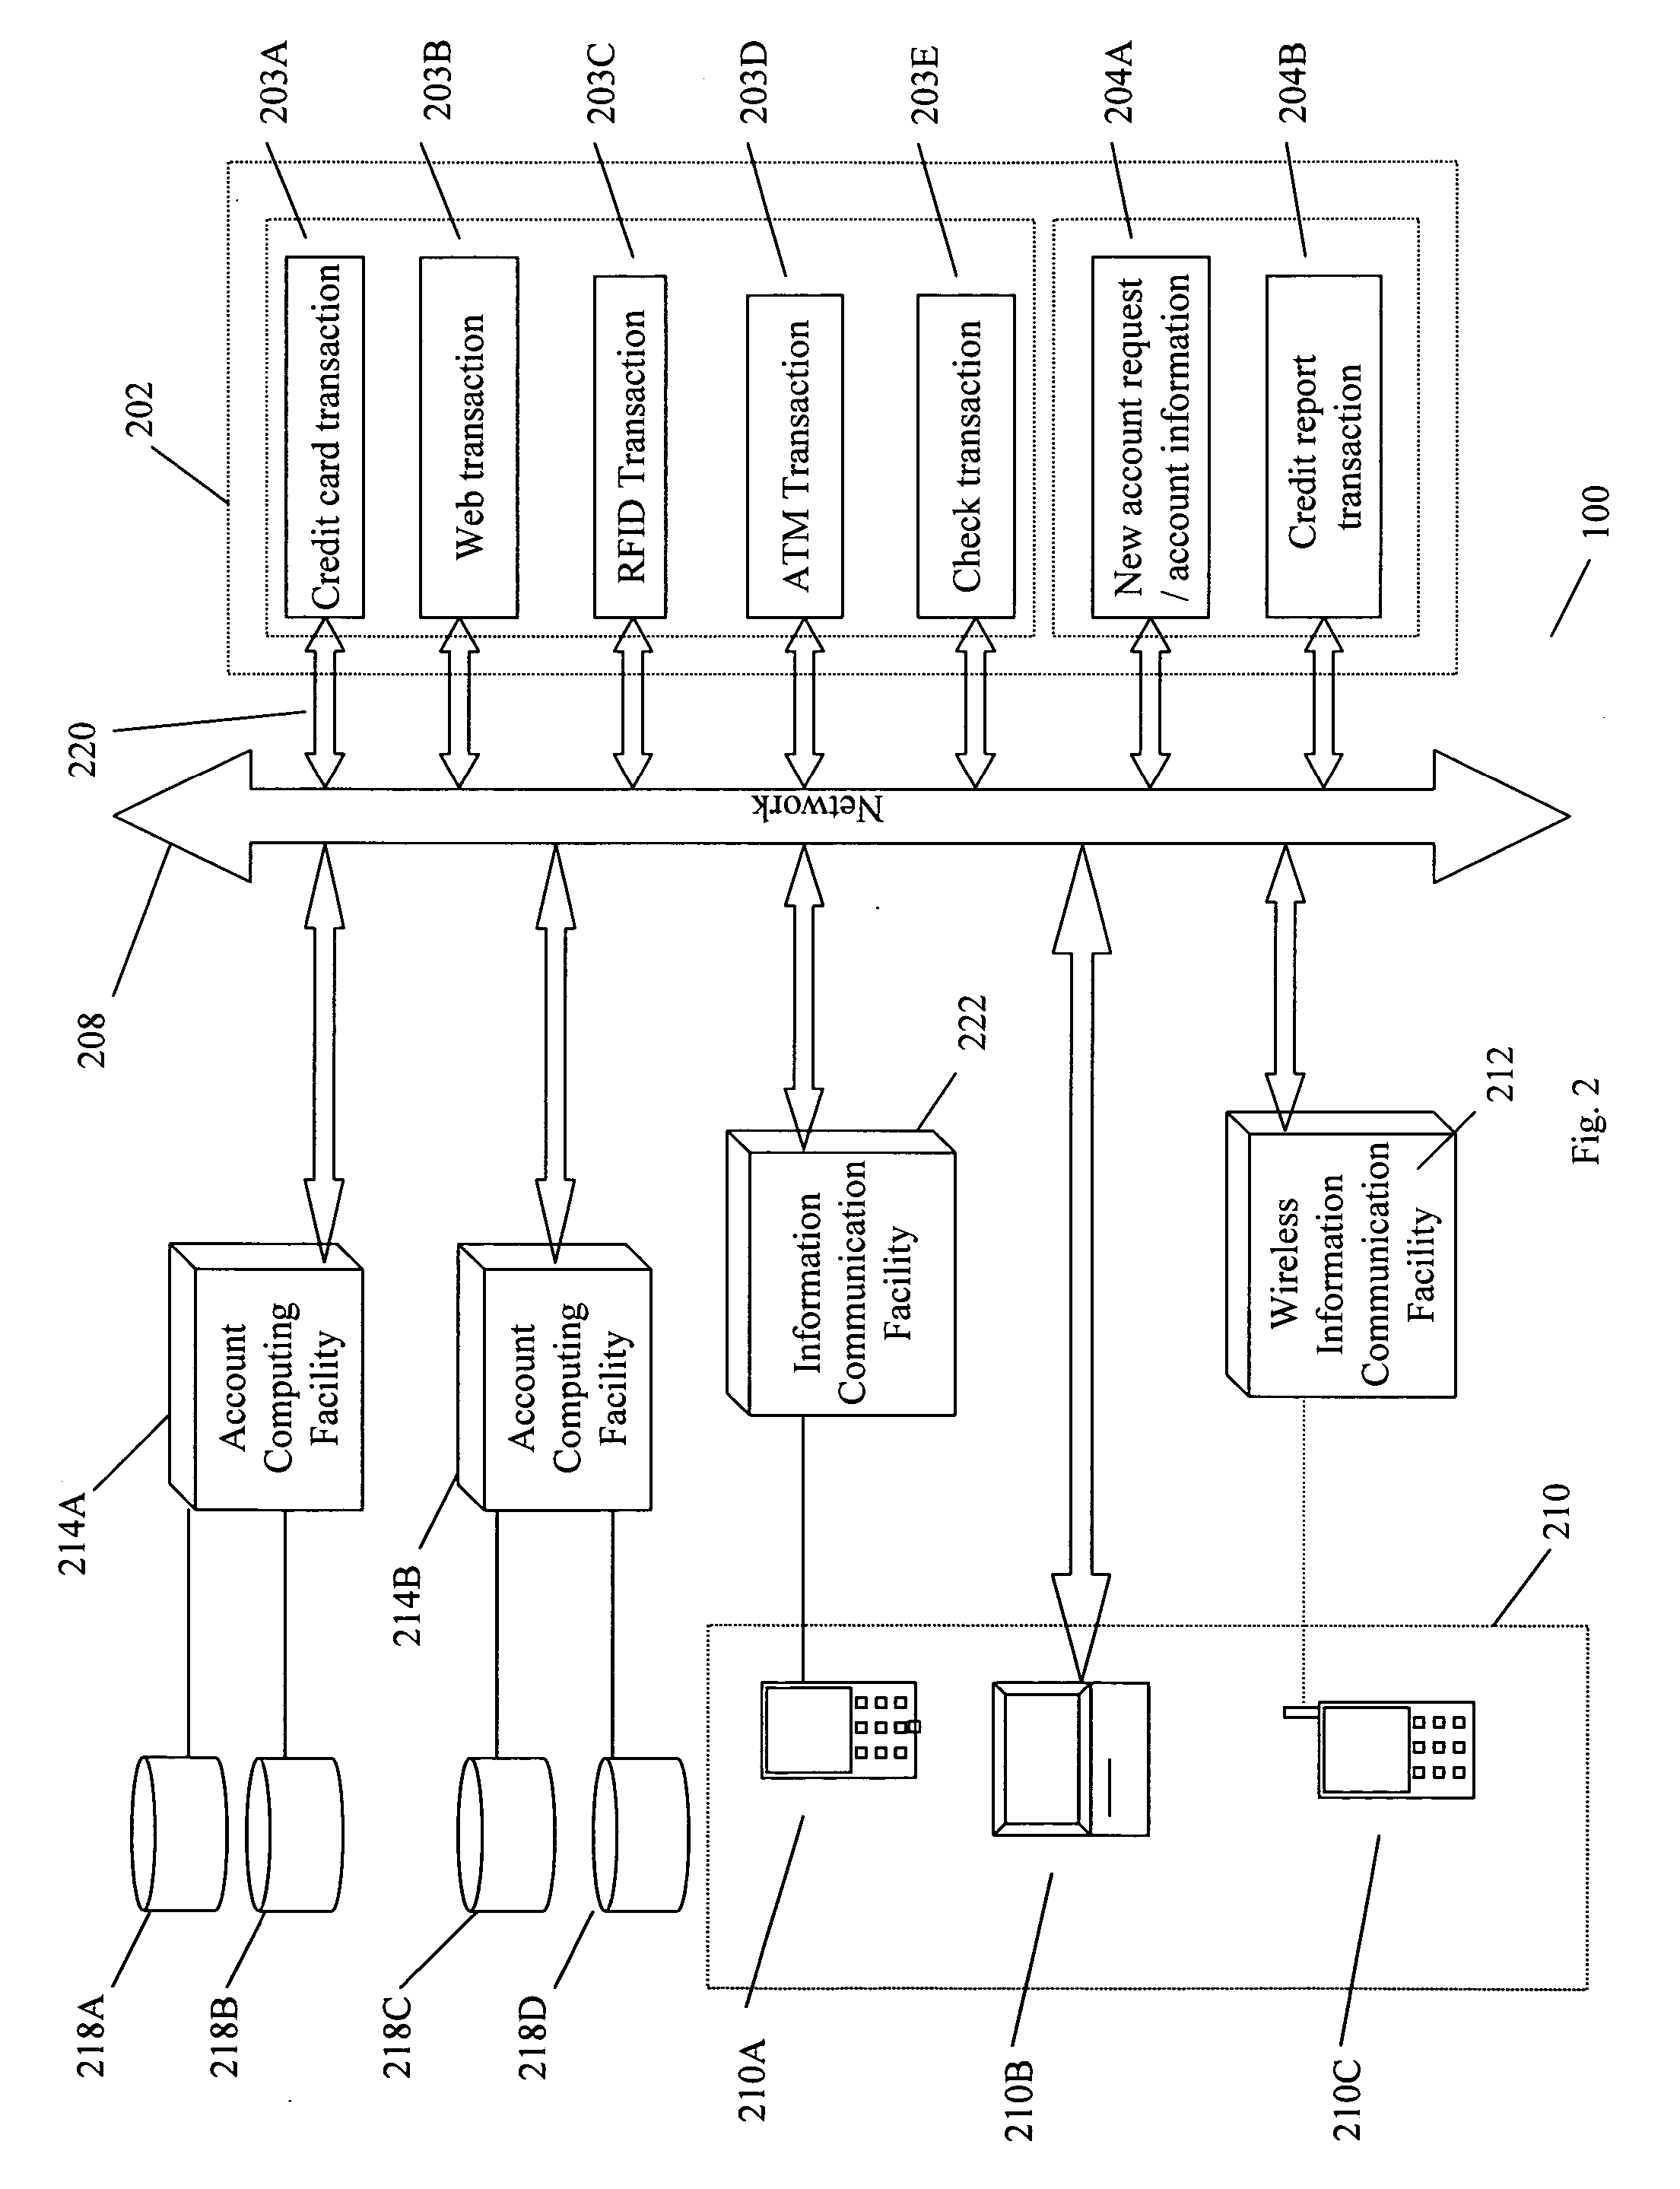 Systems and methods for performing transactions